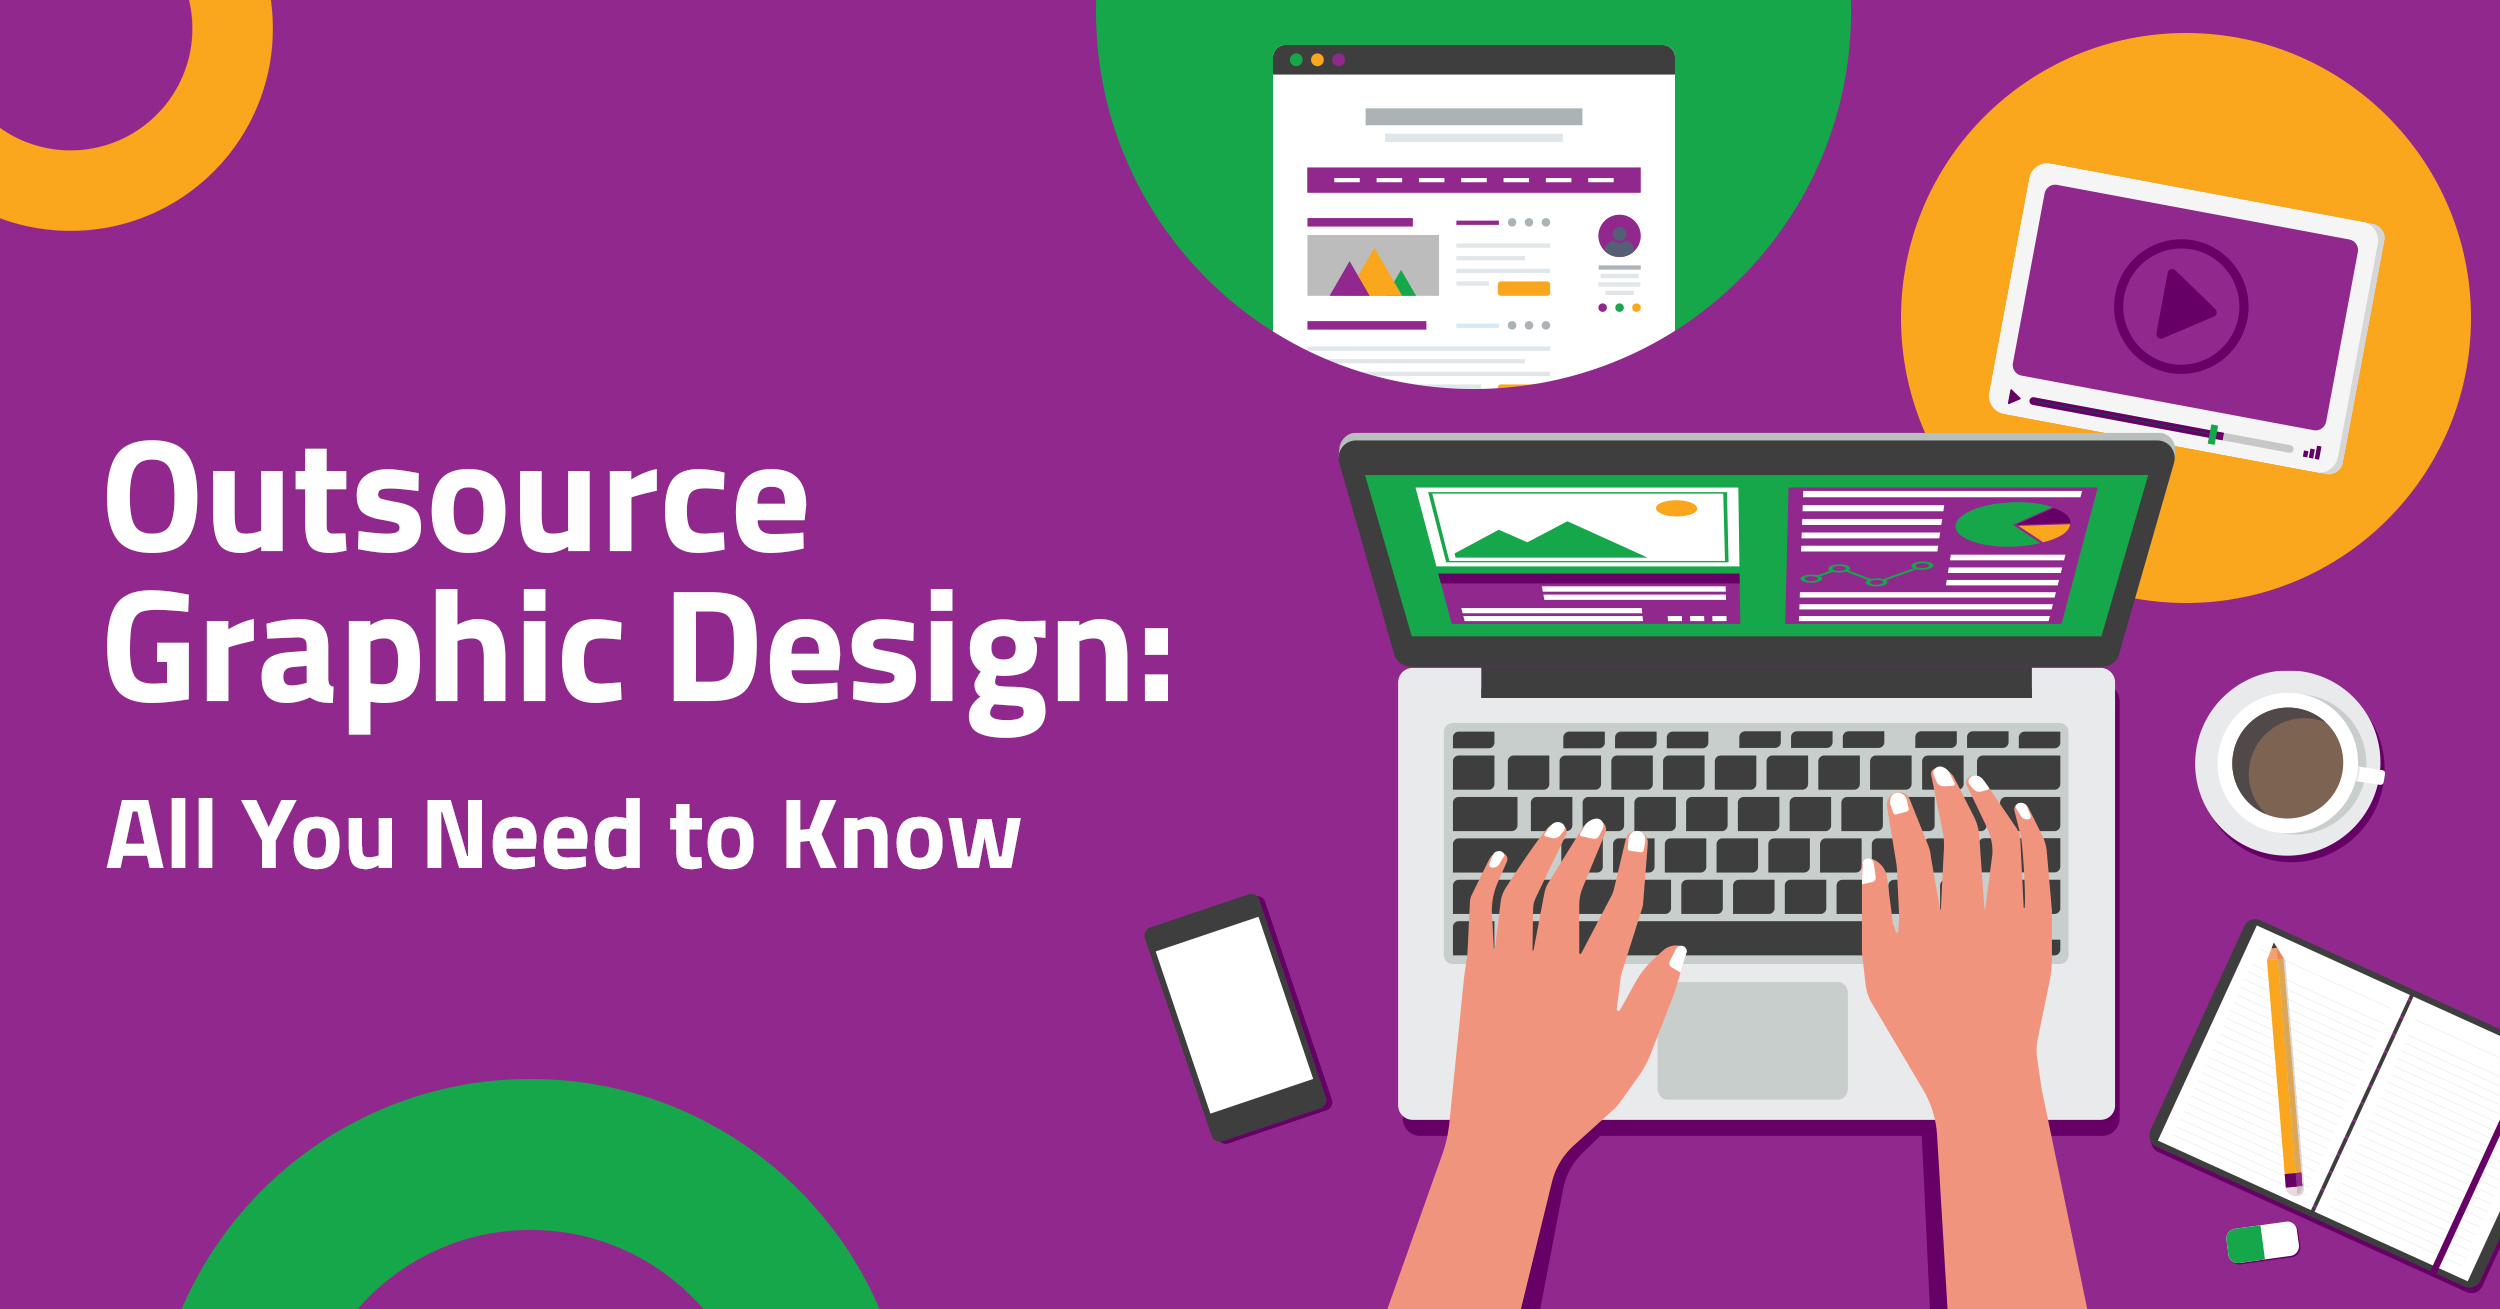 Outsource Graphic Design: All You Need to Know